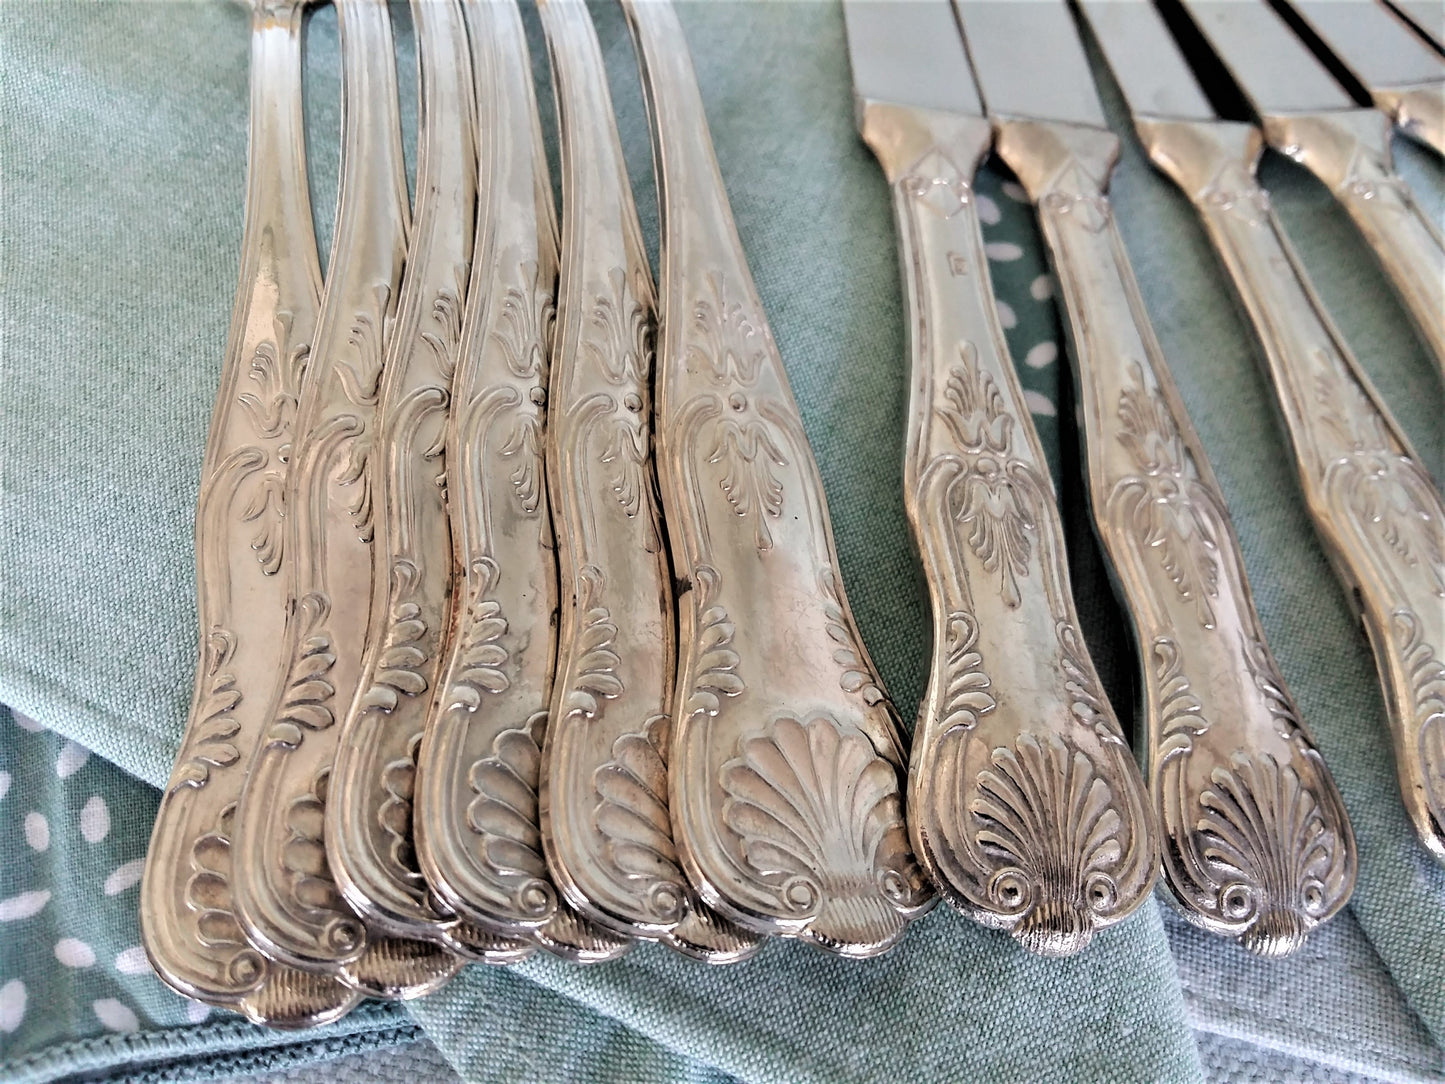 Twelve Silver Plated Knives and Forks. Elegant, Ornate Silver Plated Cutlery. from Tiggy & Pip - Just €94! Shop now at Tiggy and Pip